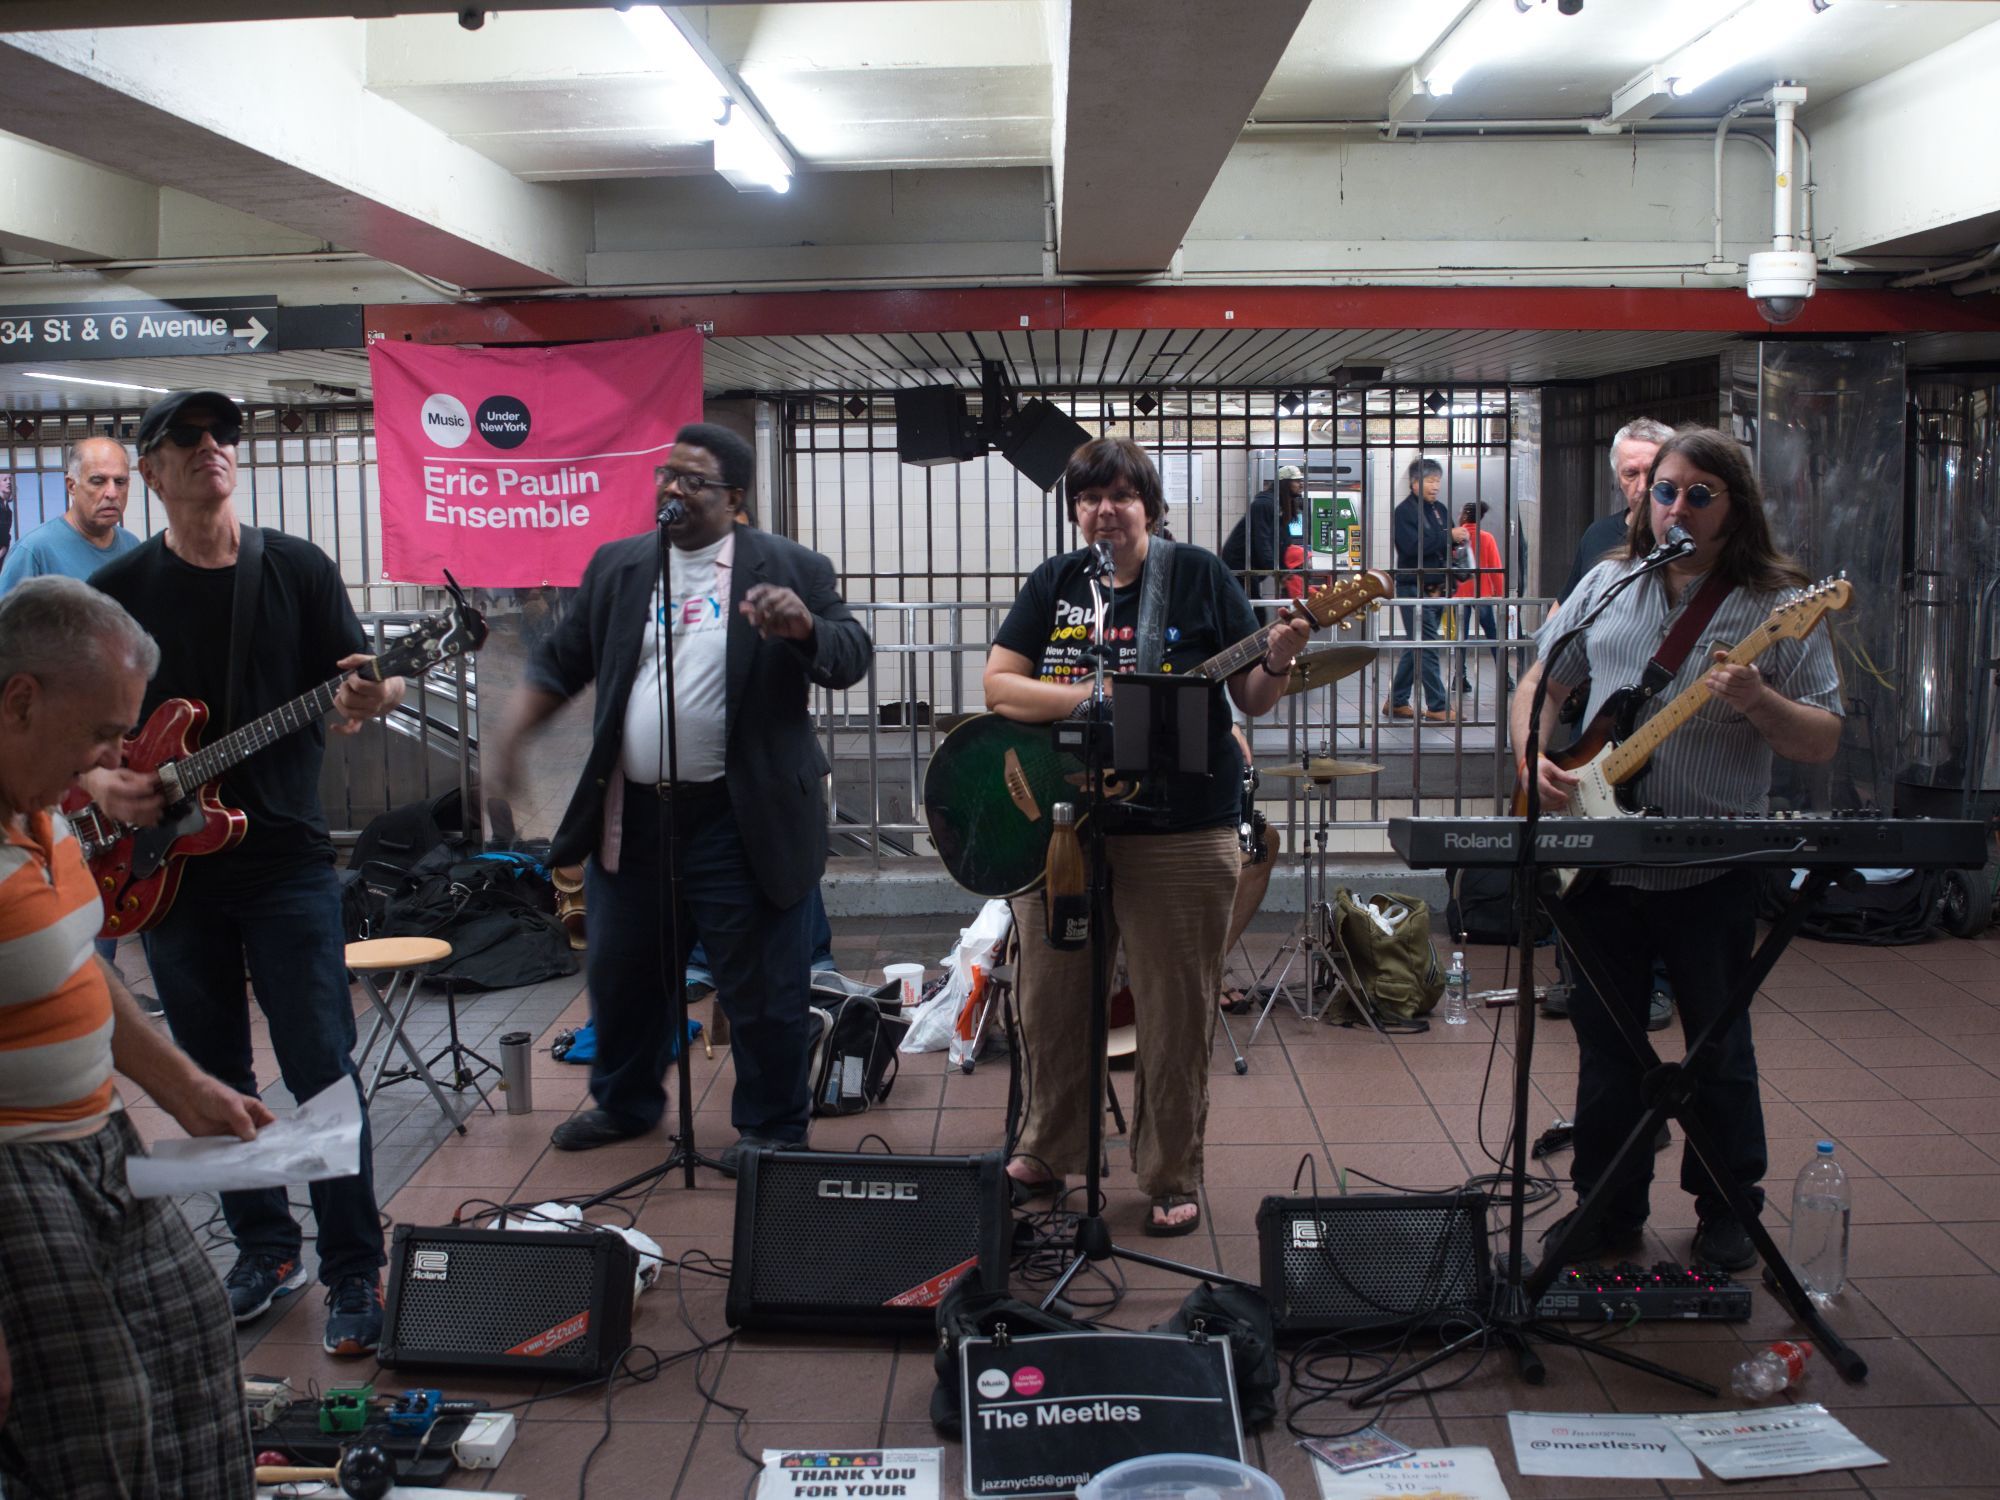 The Meetles Band playing in the NY Subway